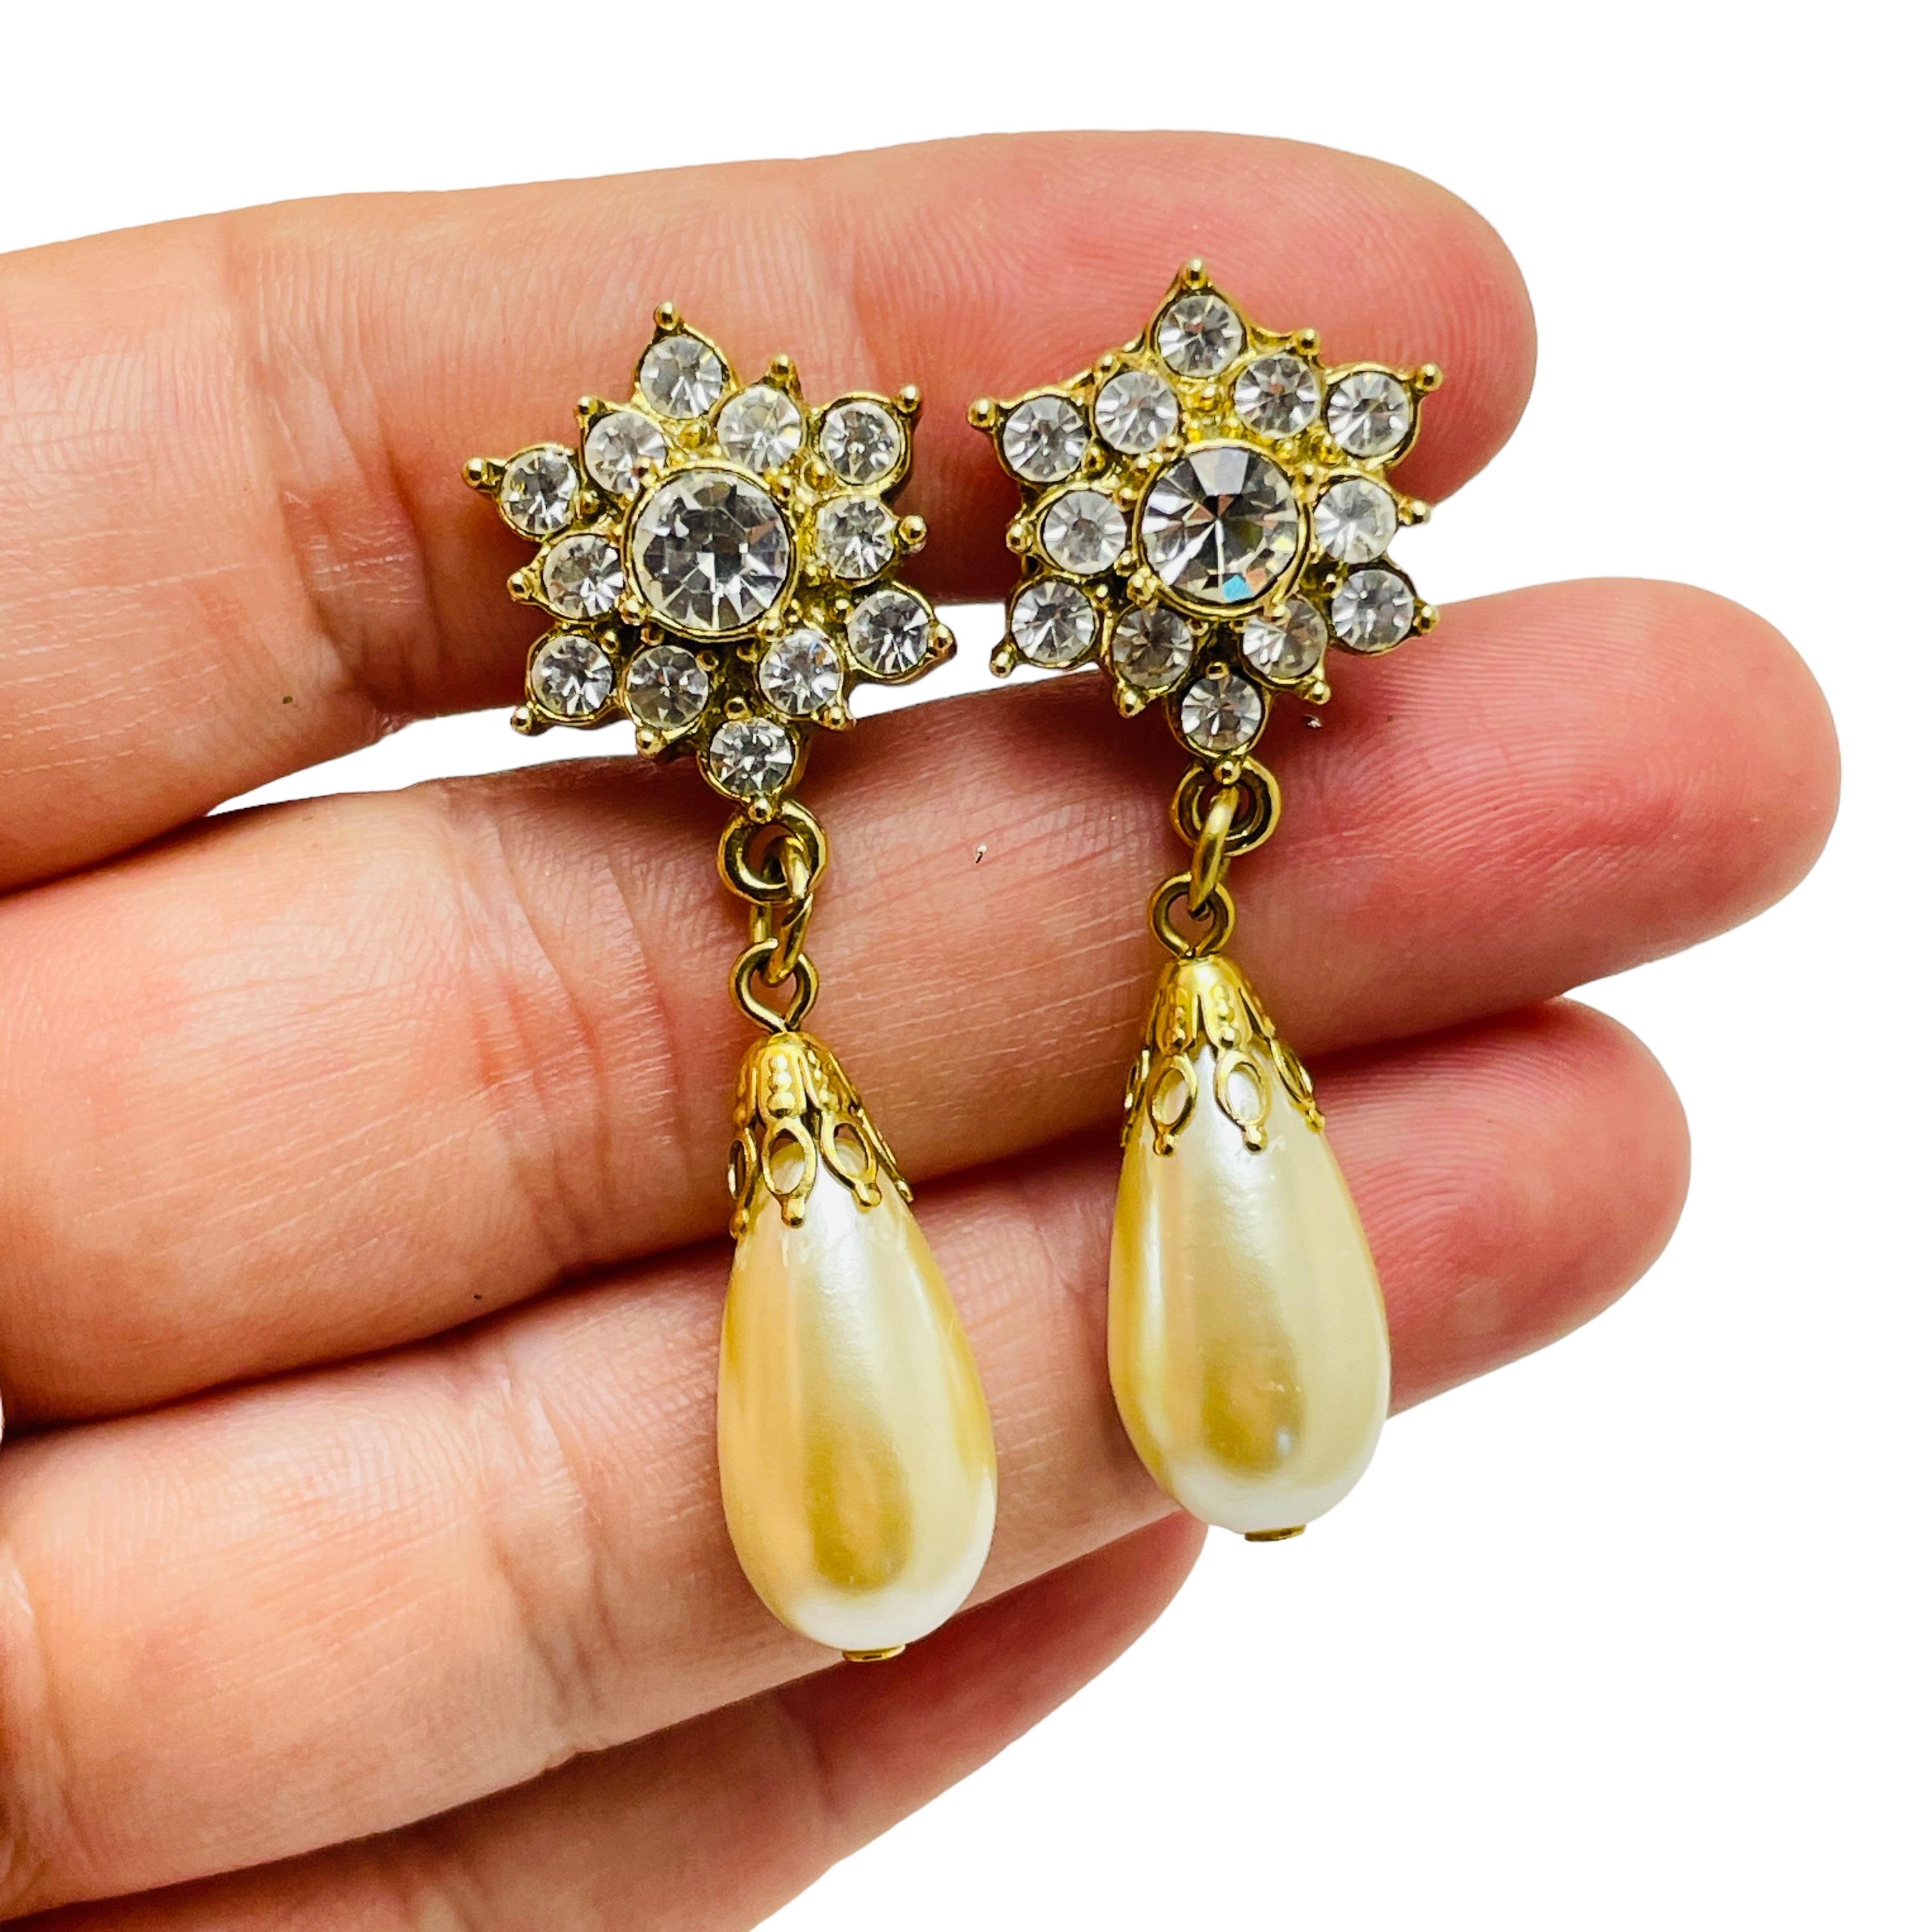 DETAILS

• unsigned

• gold tone with faux pearl and rhinestones

• vintage designer runway earrings

MEASUREMENTS

• 

CONDITION

• excellent vintage condition with minimal signs of wear

❤️❤️ VINTAGE DESIGNER JEWELRY ❤️❤️
❤️❤️ ALEXANDER'S BOUTIQUE